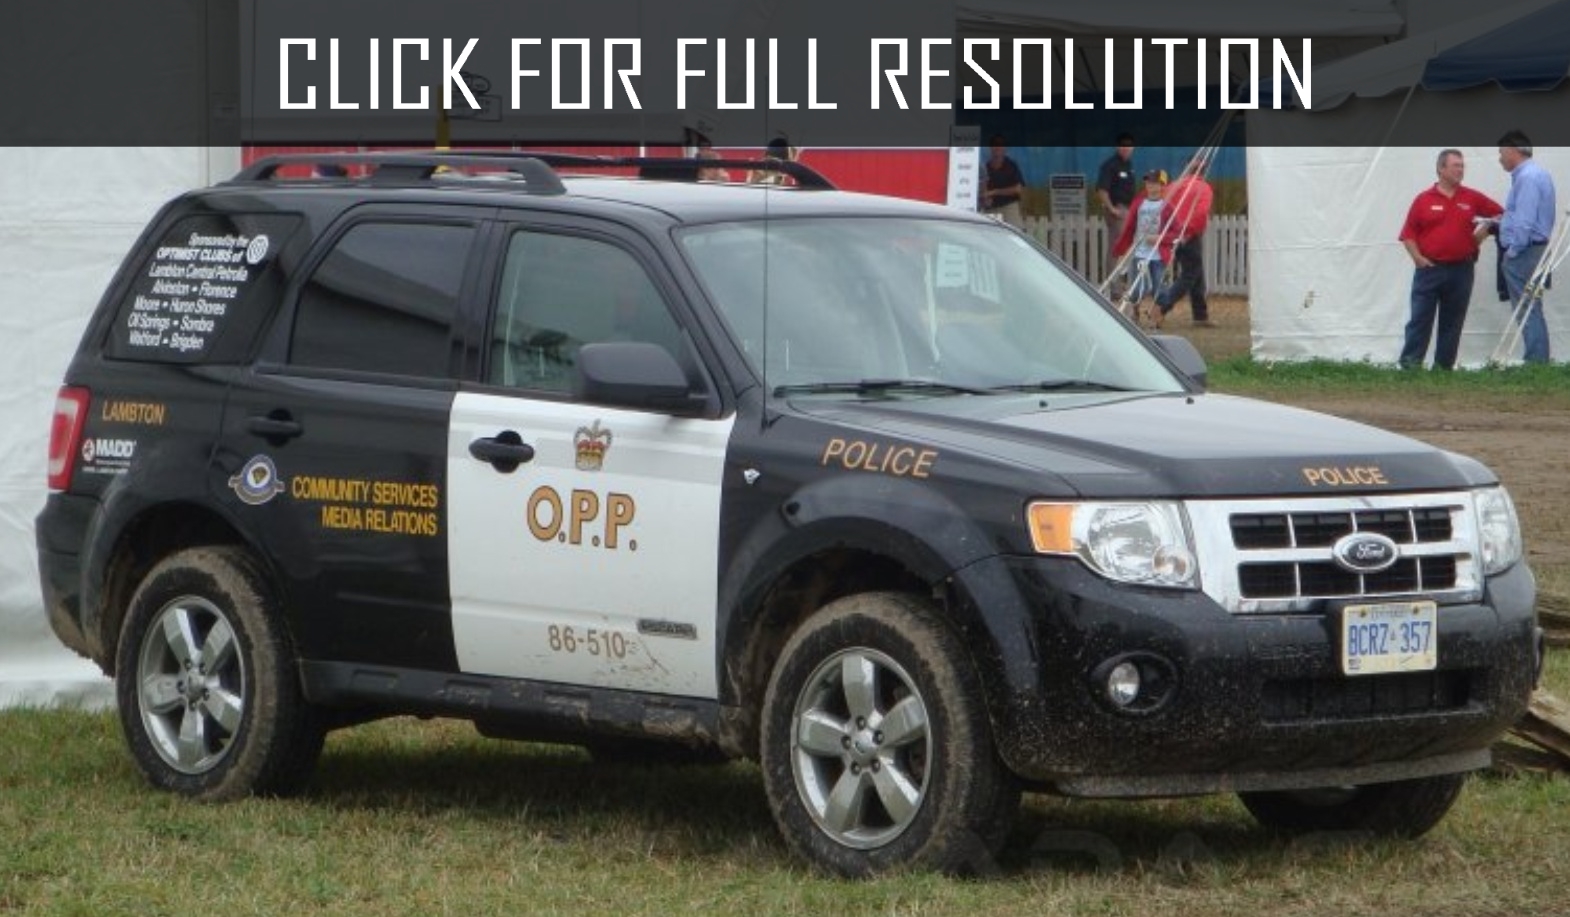 Ford Escape Police Amazing Photo Gallery Some Information And